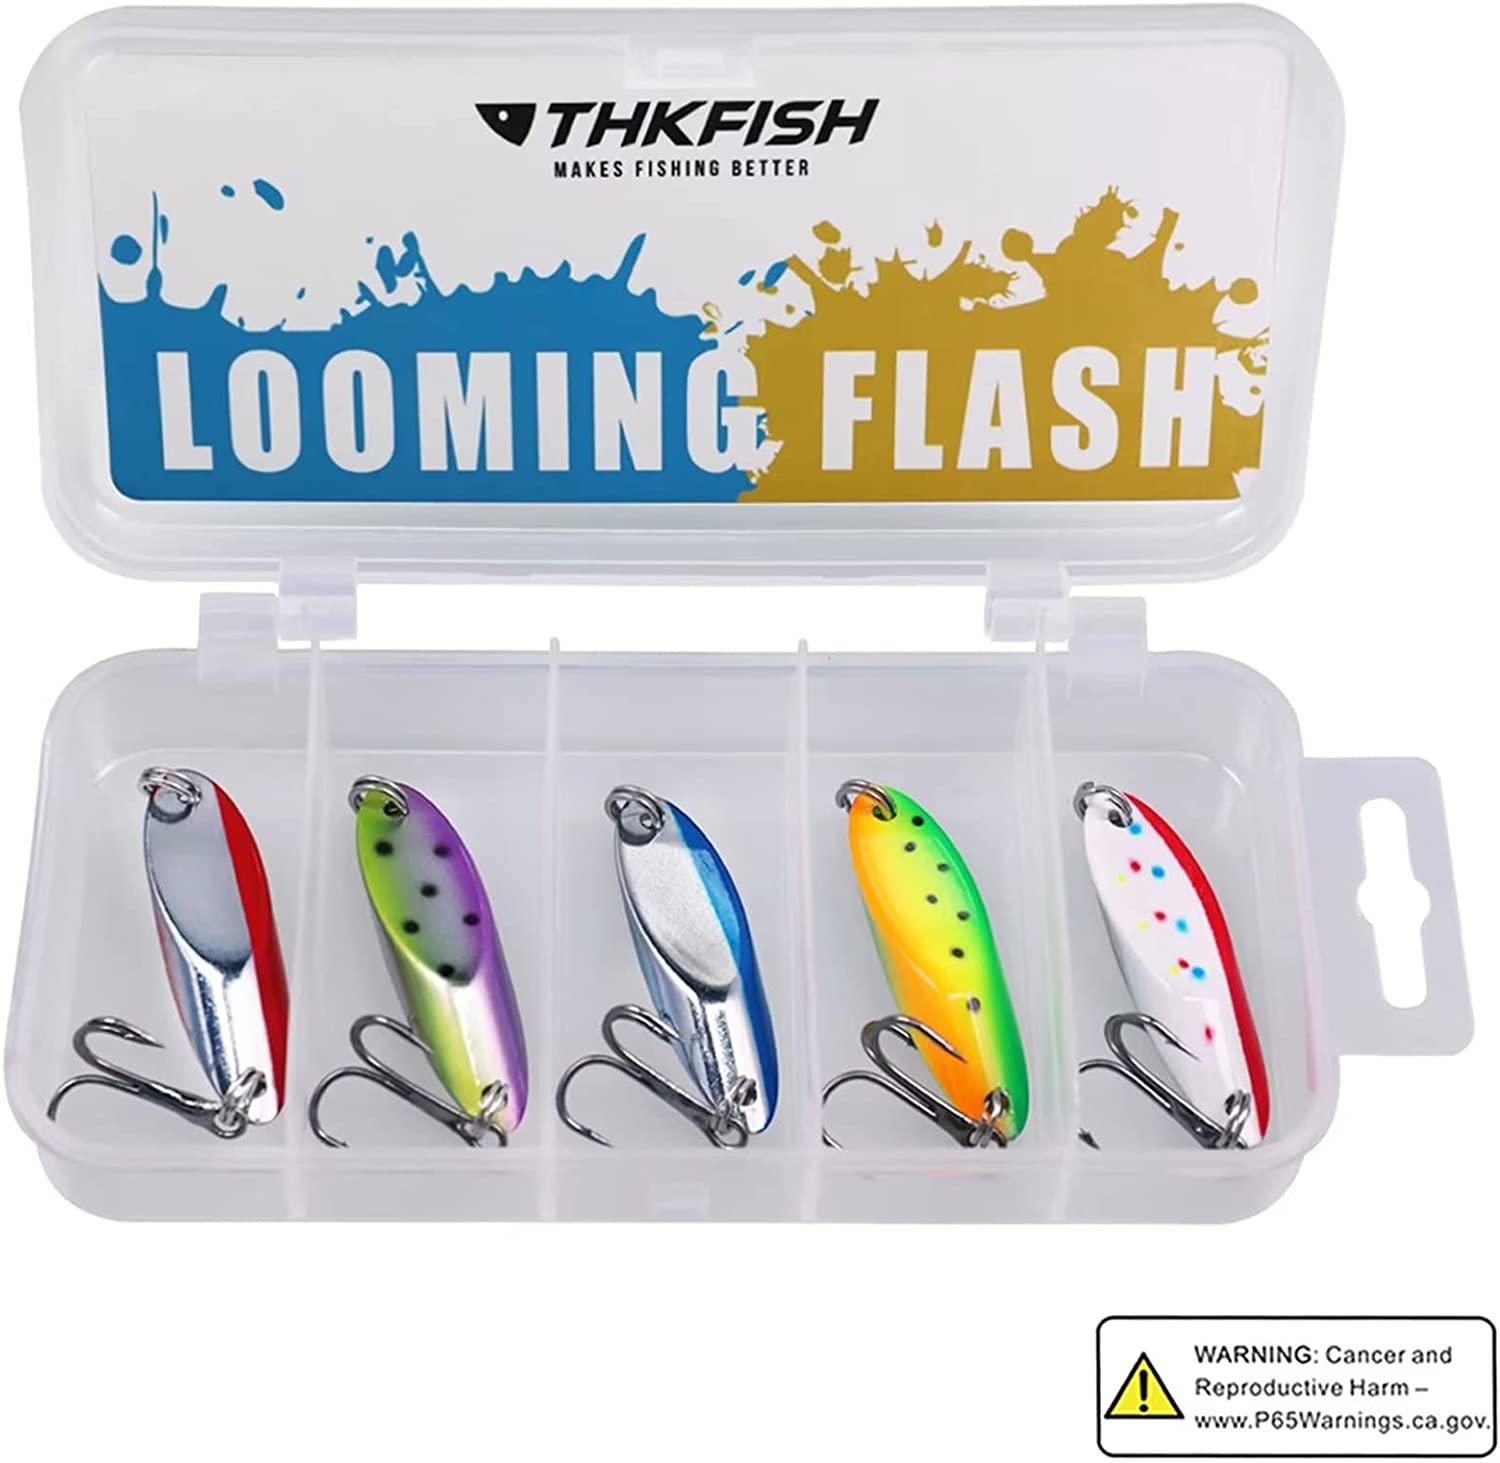 THKFISH Fishing Lures Trout Lures Fishing Spoons Lures for Trout Pike Bass  Crappie Walleye 18oz 15oz 14oz 38oz 12oz 34oz 5pcs Color A 18oz 5pcs